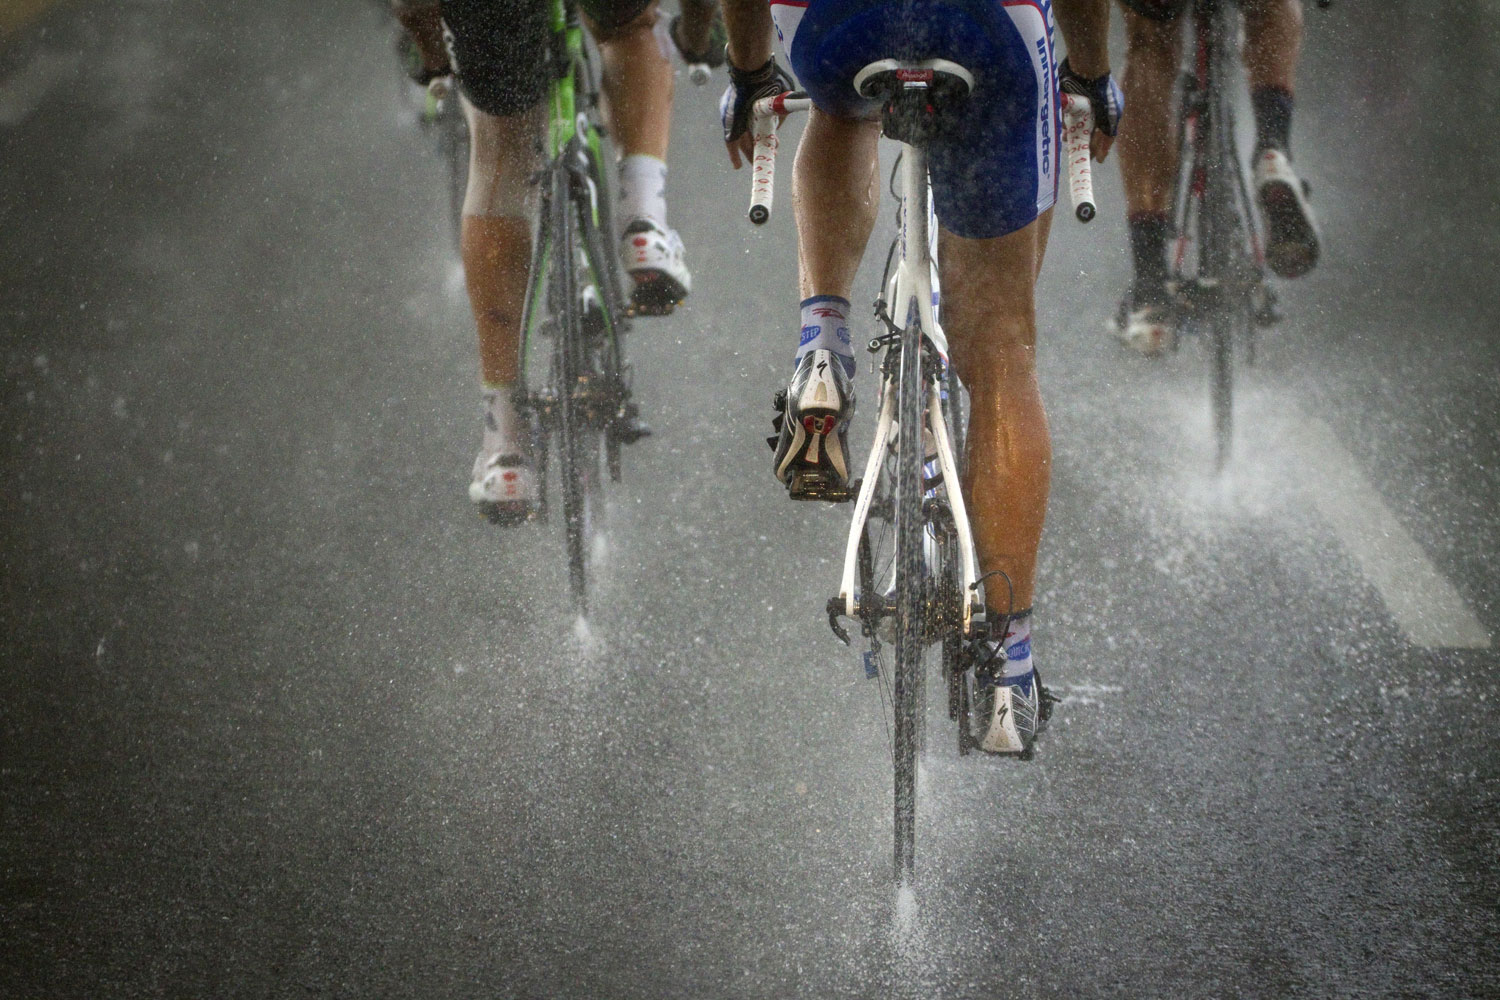 July 13 , 2011. Competitors ride in the rain during the 167.5 km eleventh stage of the 2011 Tour de France cycling race. The stage runs between Blaye-les-Mines and Lavaur, in Pays de Cocagne, southern France.